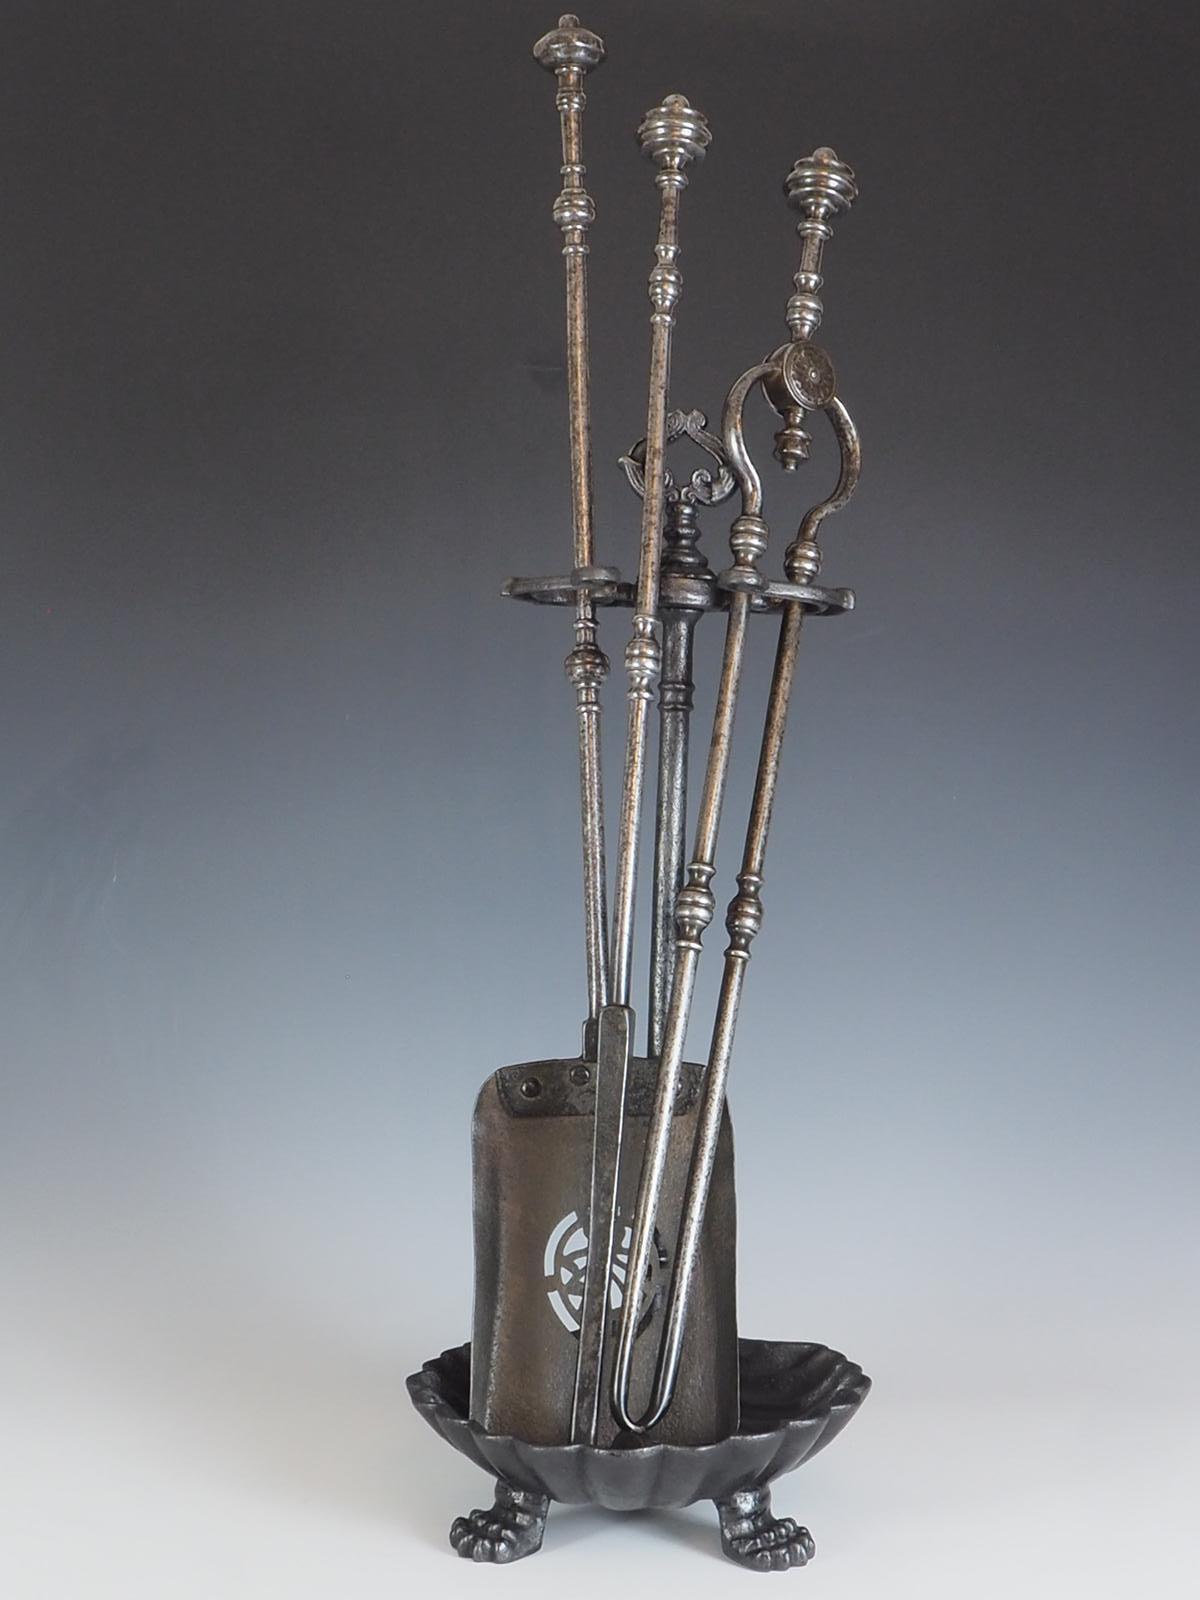 Companion set of three George III steel fire tools is a true masterpiece of craftsmanship from the early 19th century. The set includes a lovely pierced shovel, tongs, and poker, each with capped and knopped finials and banded shafts.

The pierced